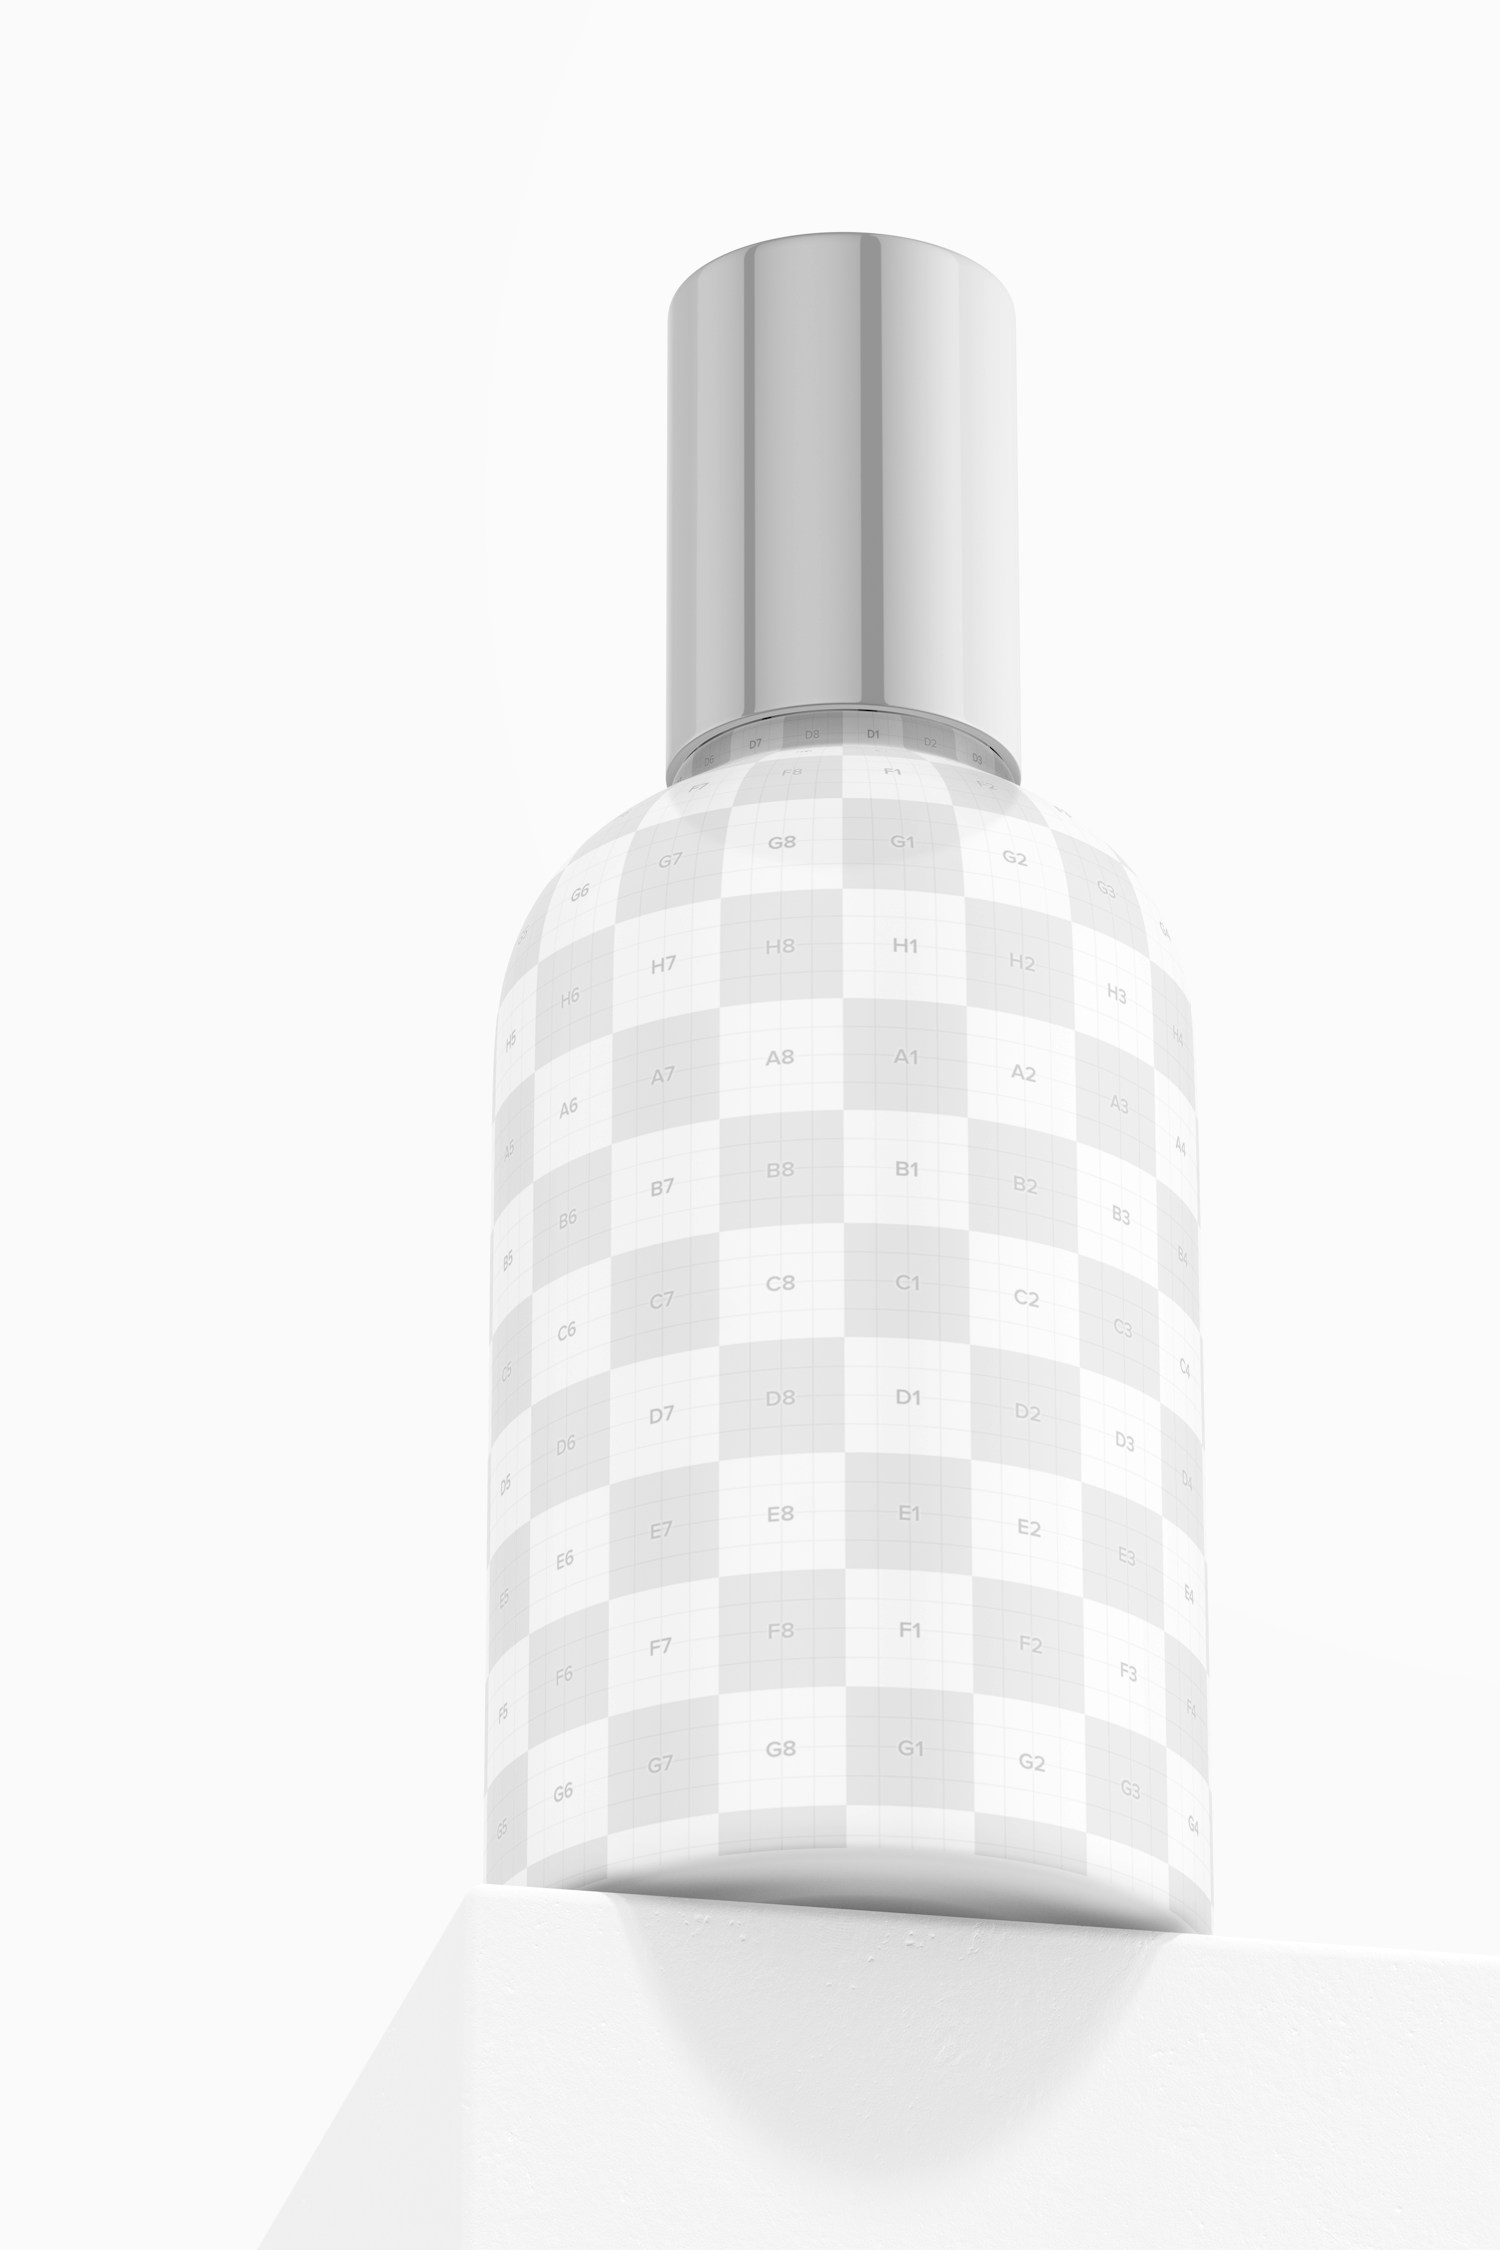 Small Facial Serum Bottle Mockup, Low Angle View